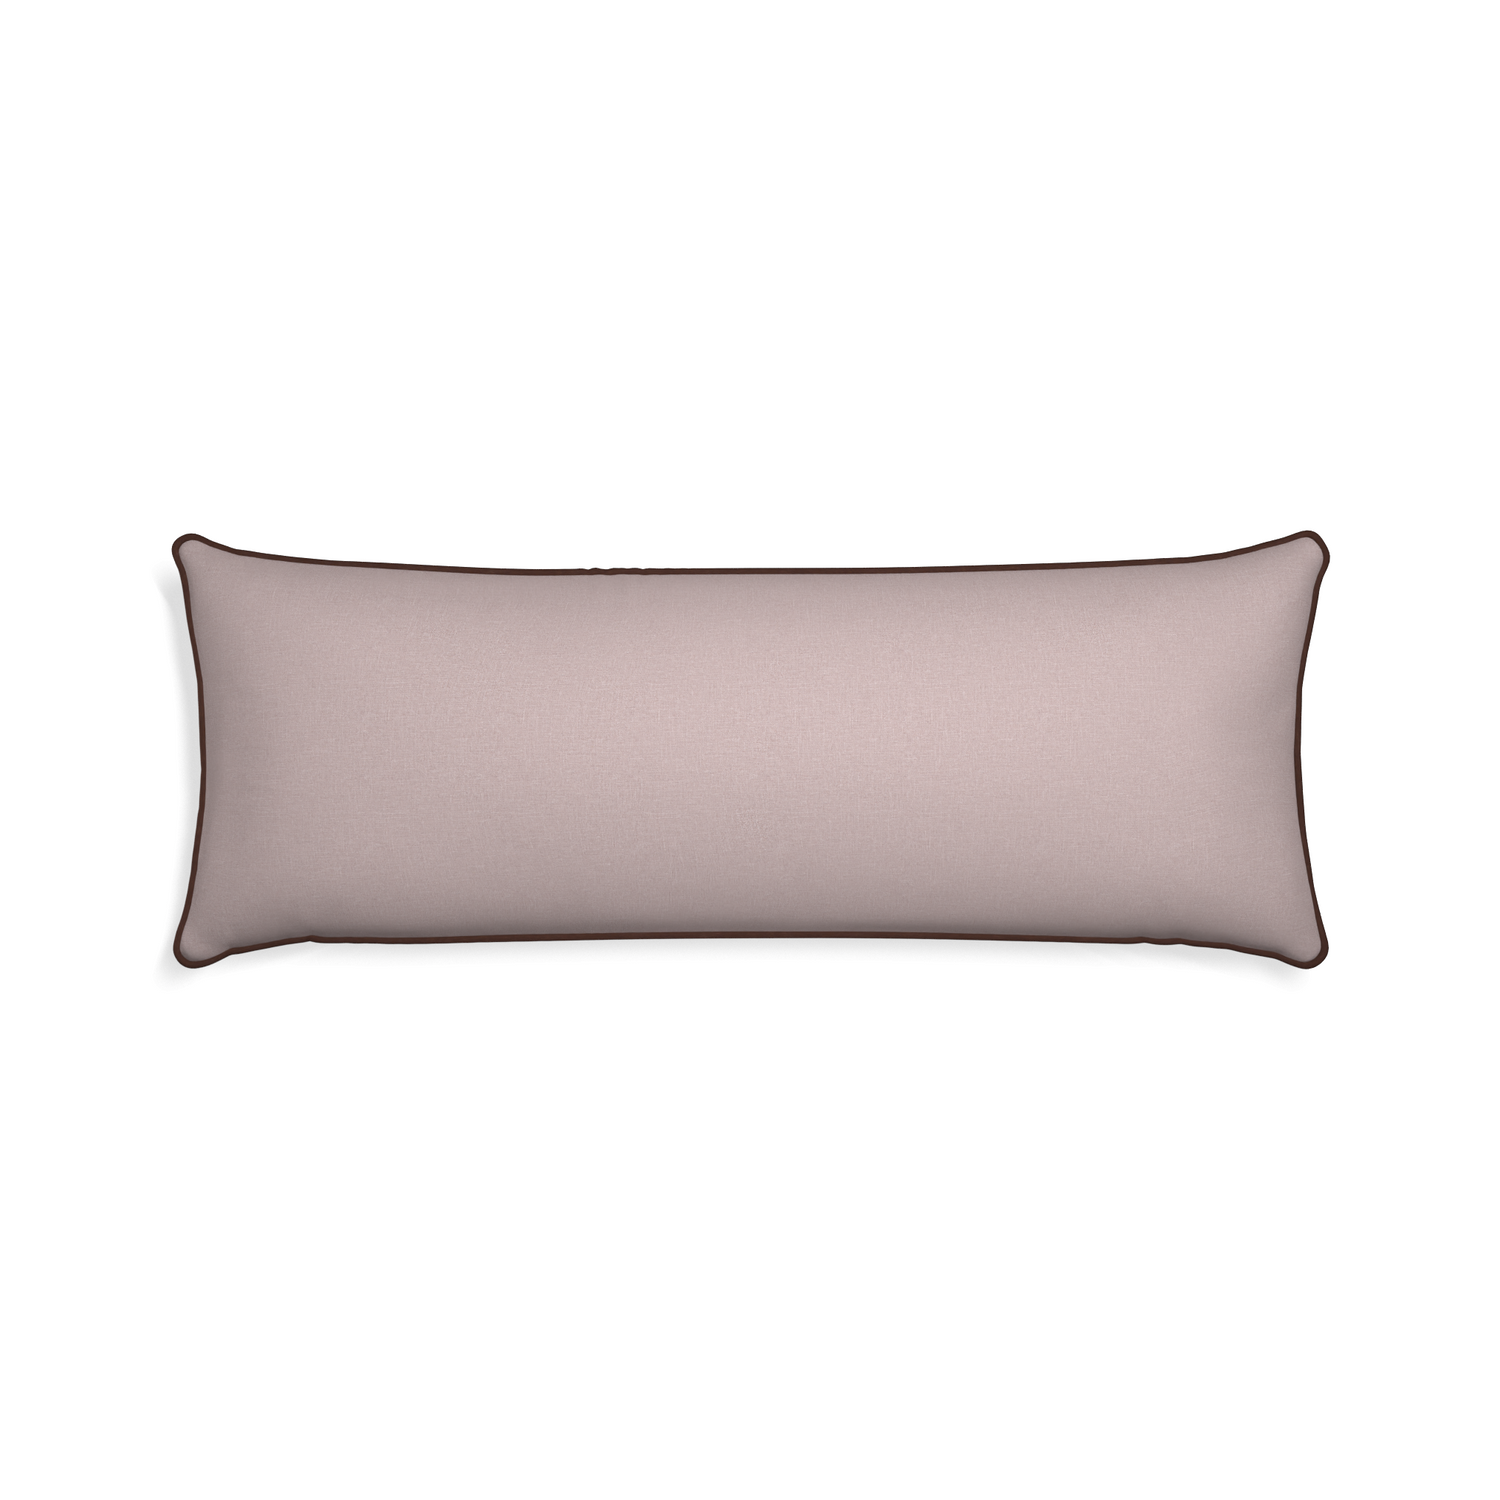 Xl-lumbar orchid custom mauve pinkpillow with w piping on white background